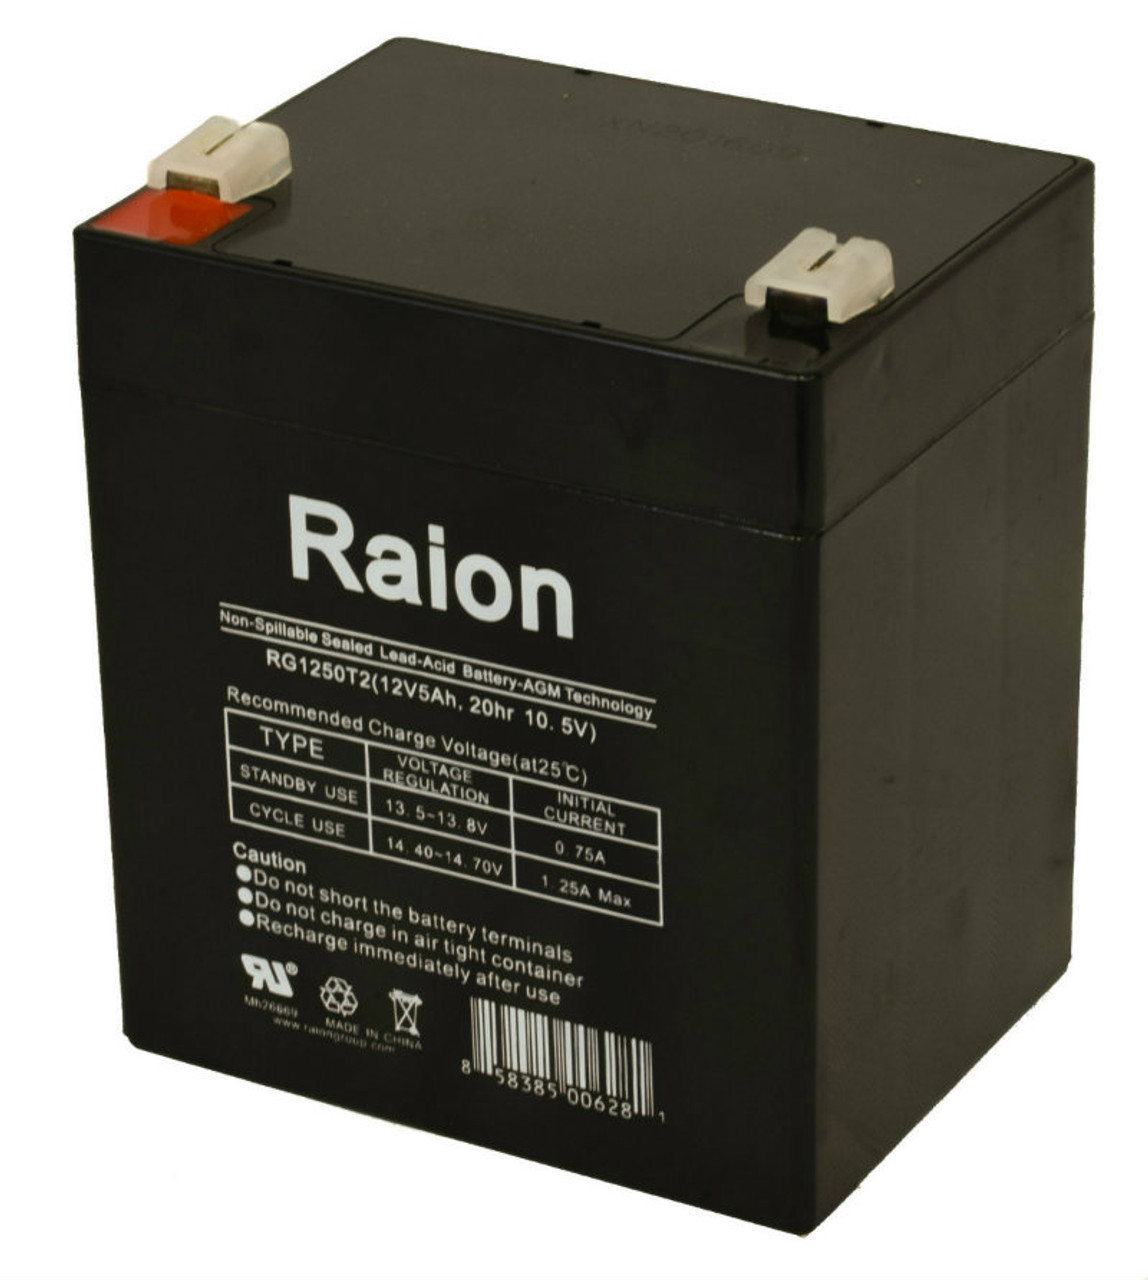 Raion Power RG1250T1 Replacement Battery for Sigmas SP12-5